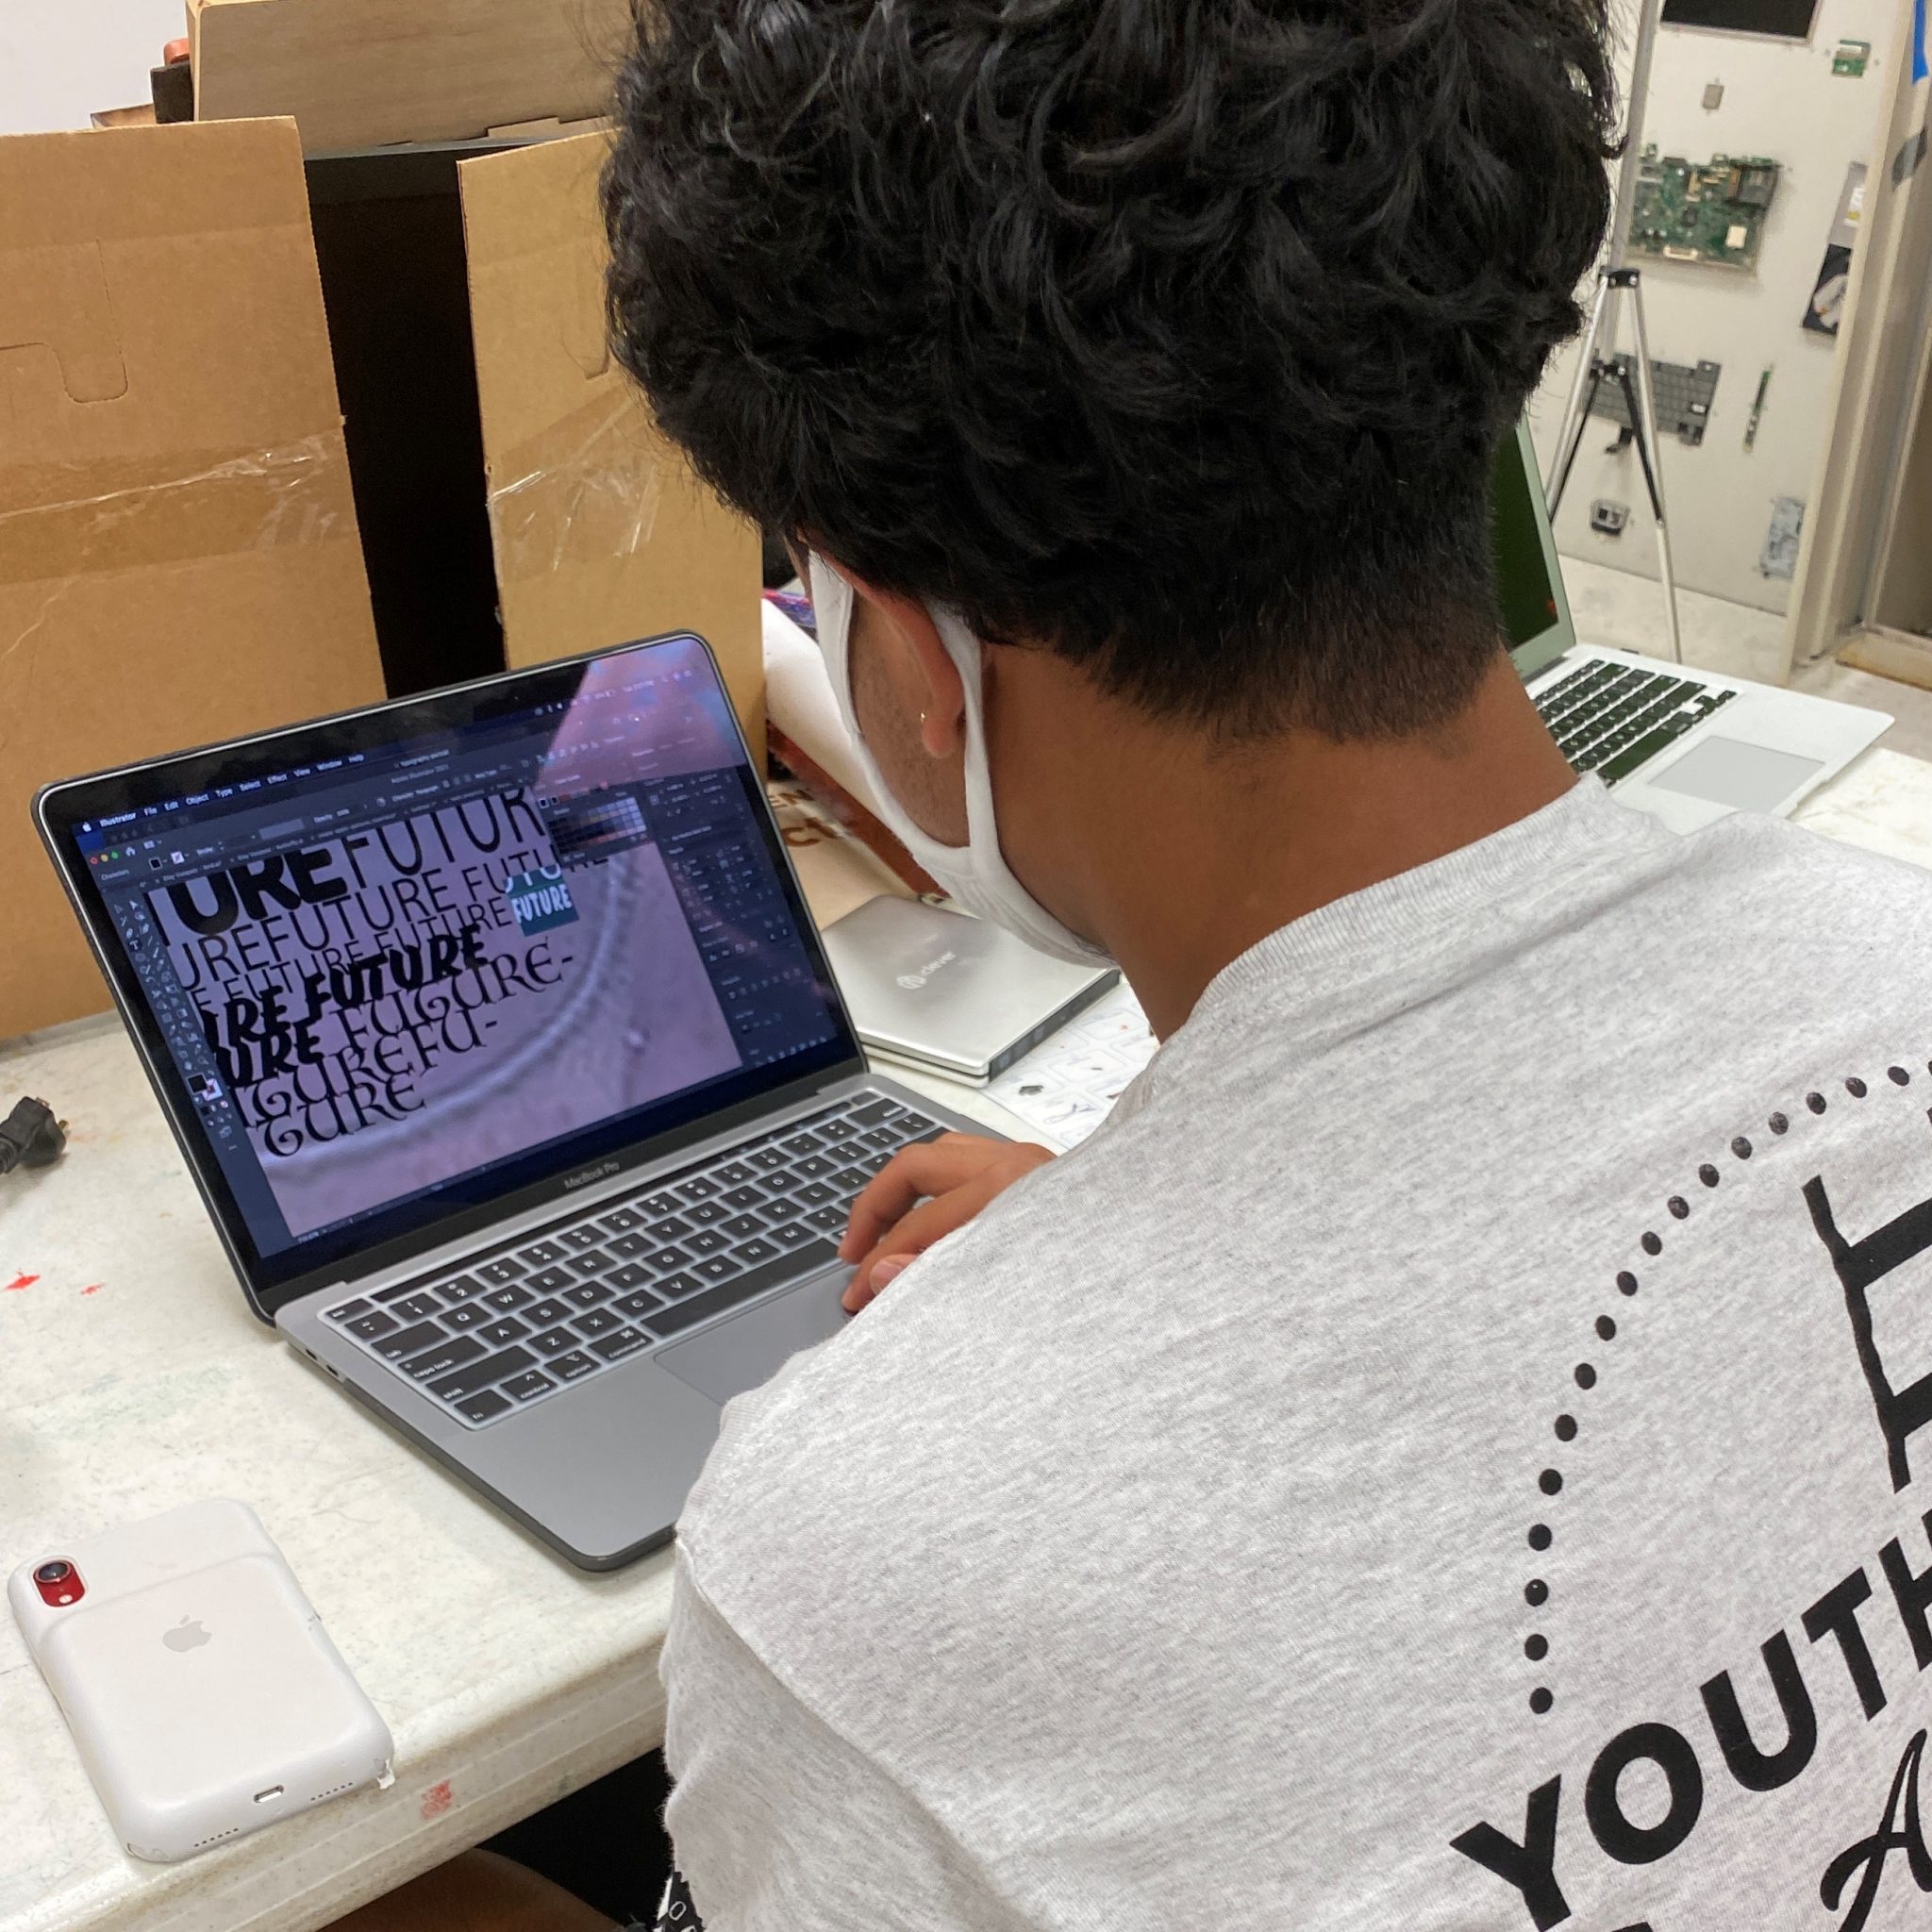 A Media Corps participant using the Adobe programs to create a t-shirt design.